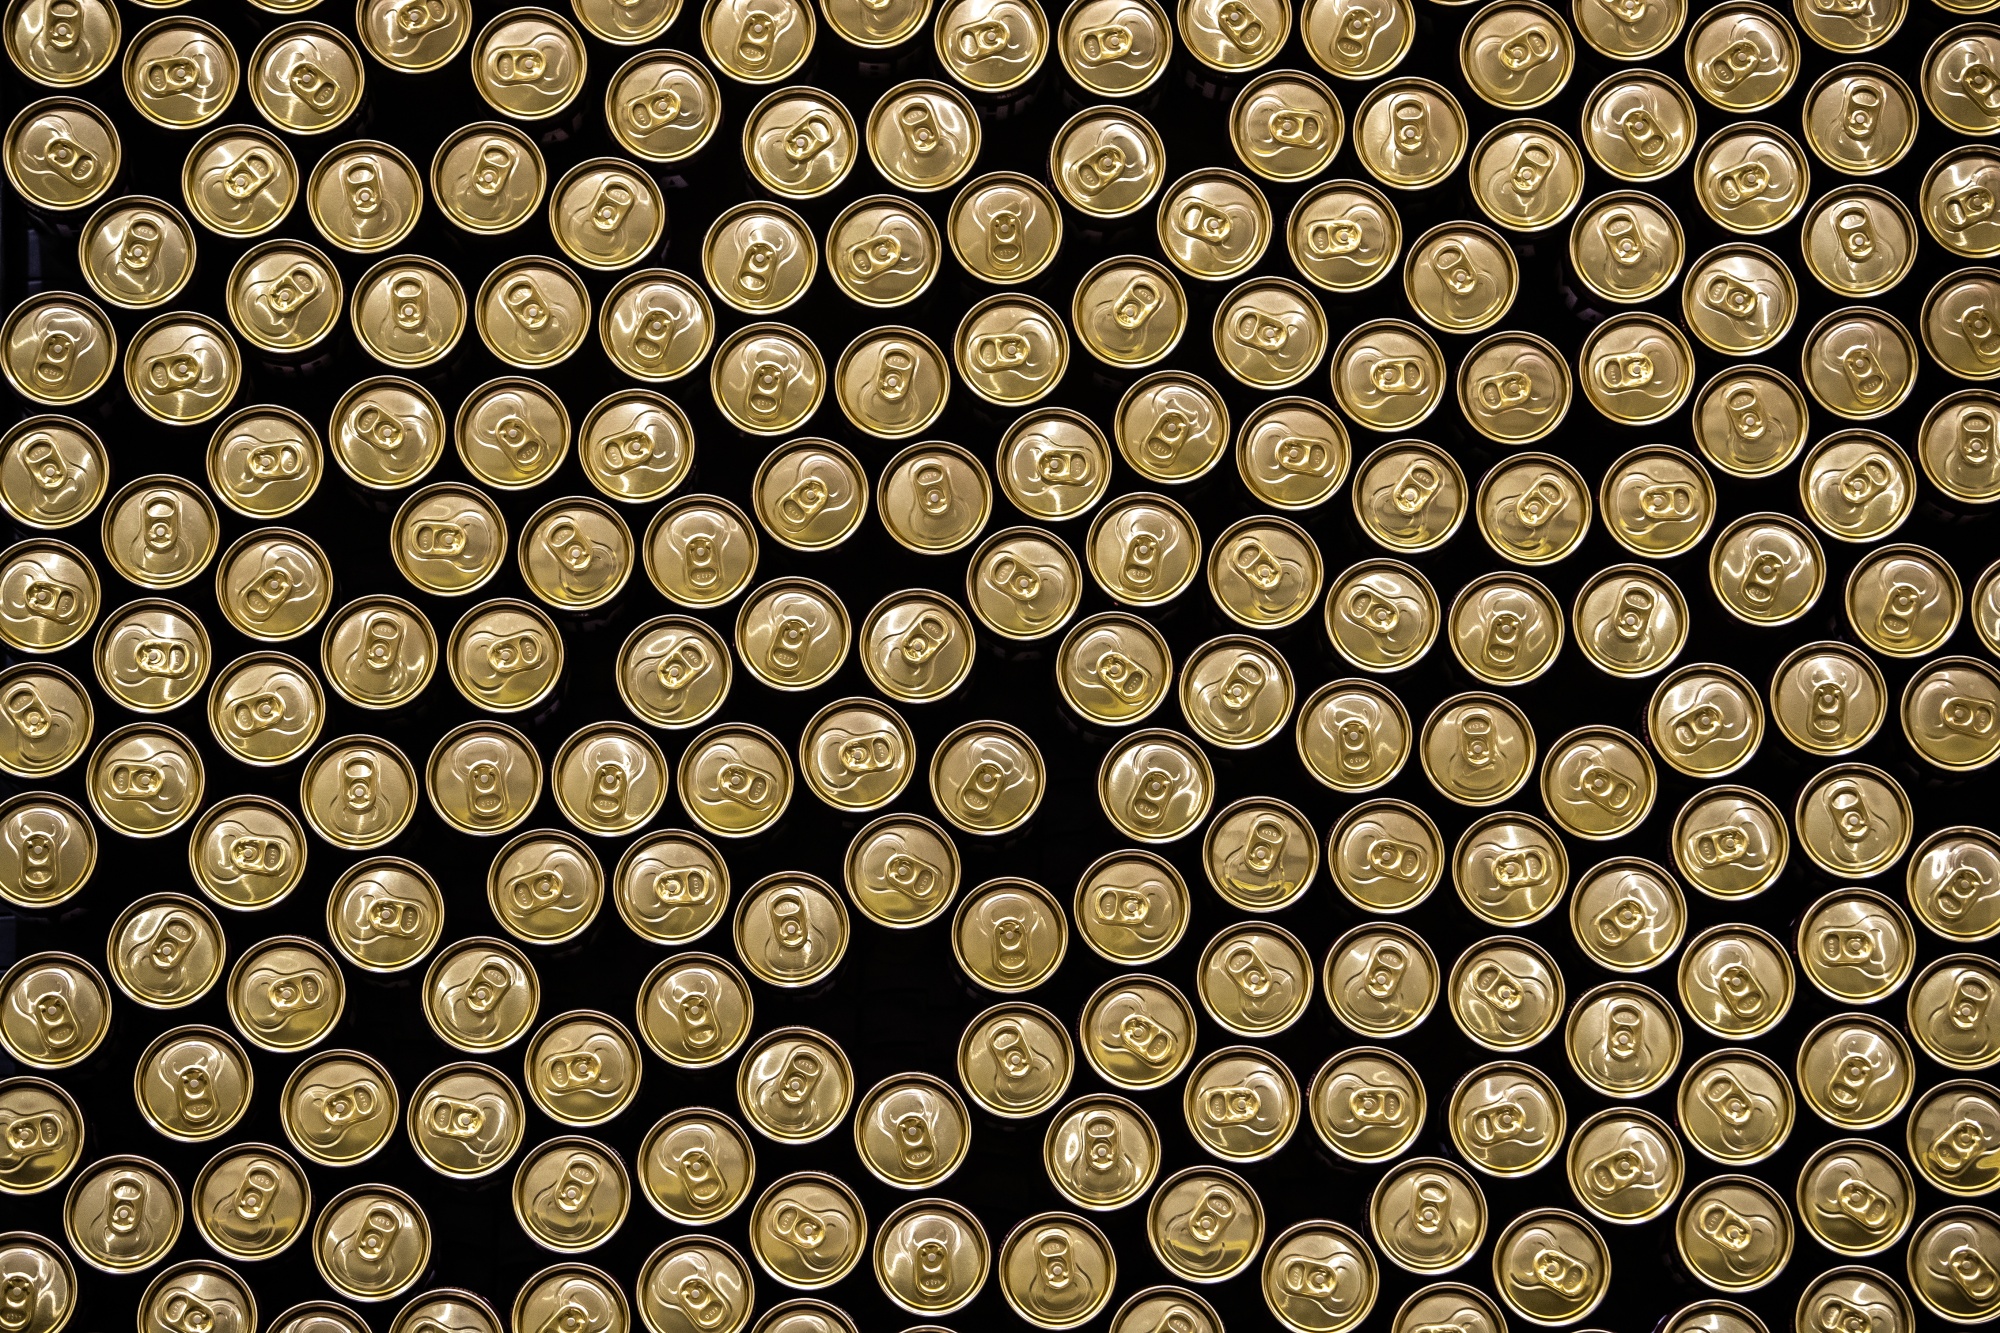 Cans of beer on the production line at the Ambev SA bottling facility in Sao Paulo, Brazil.